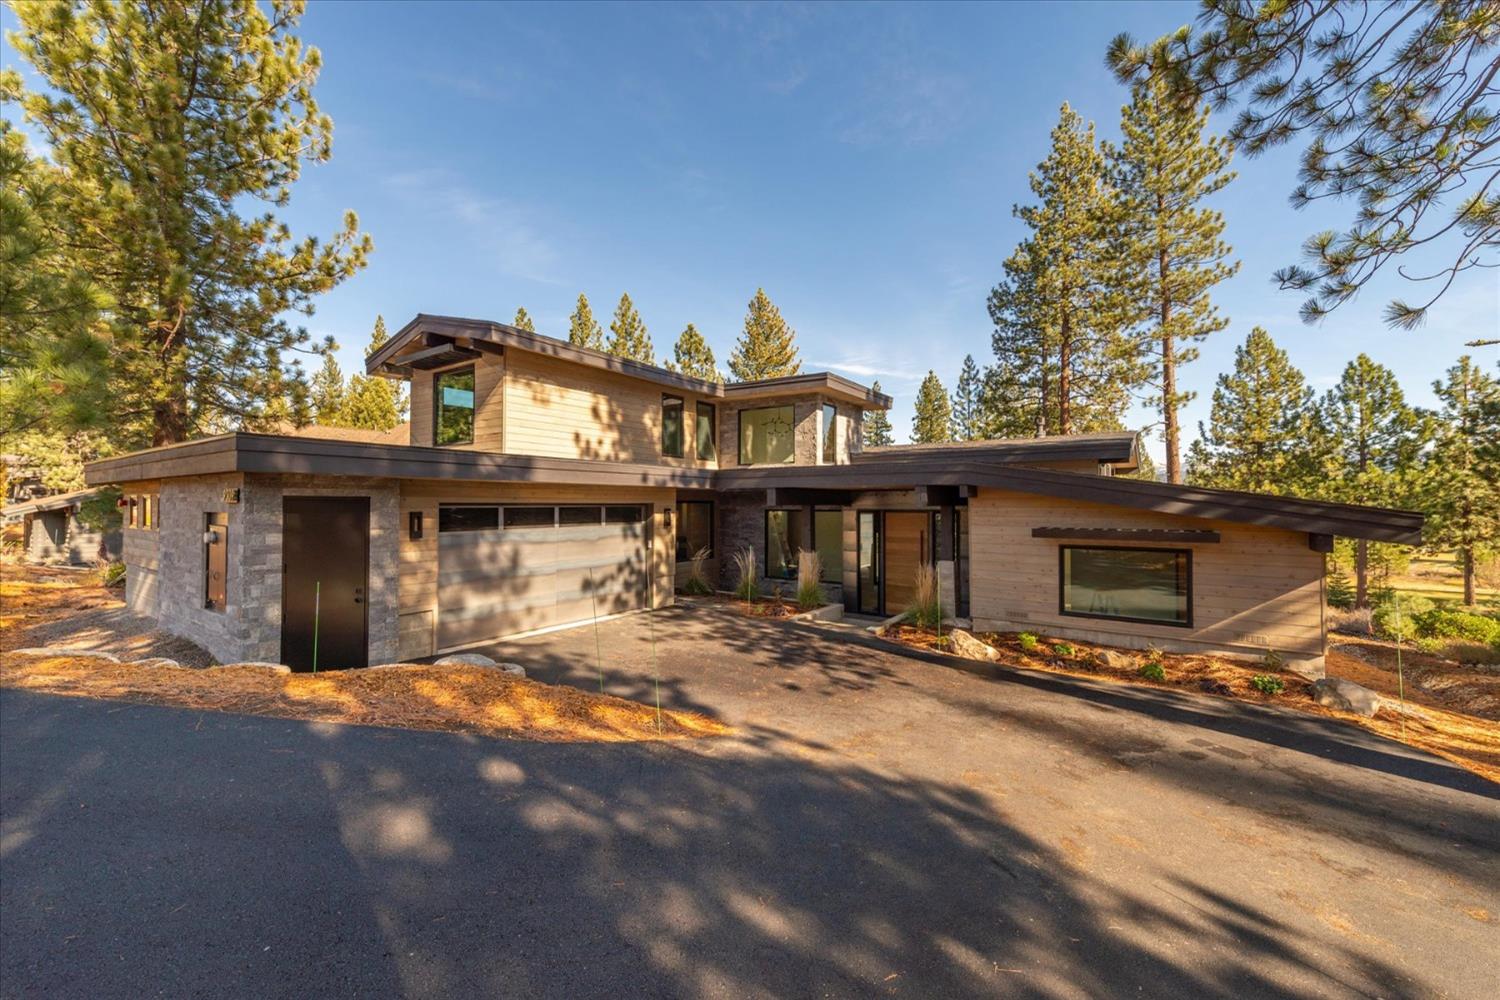 Photo of 9309 Heartwood Dr in Truckee, CA